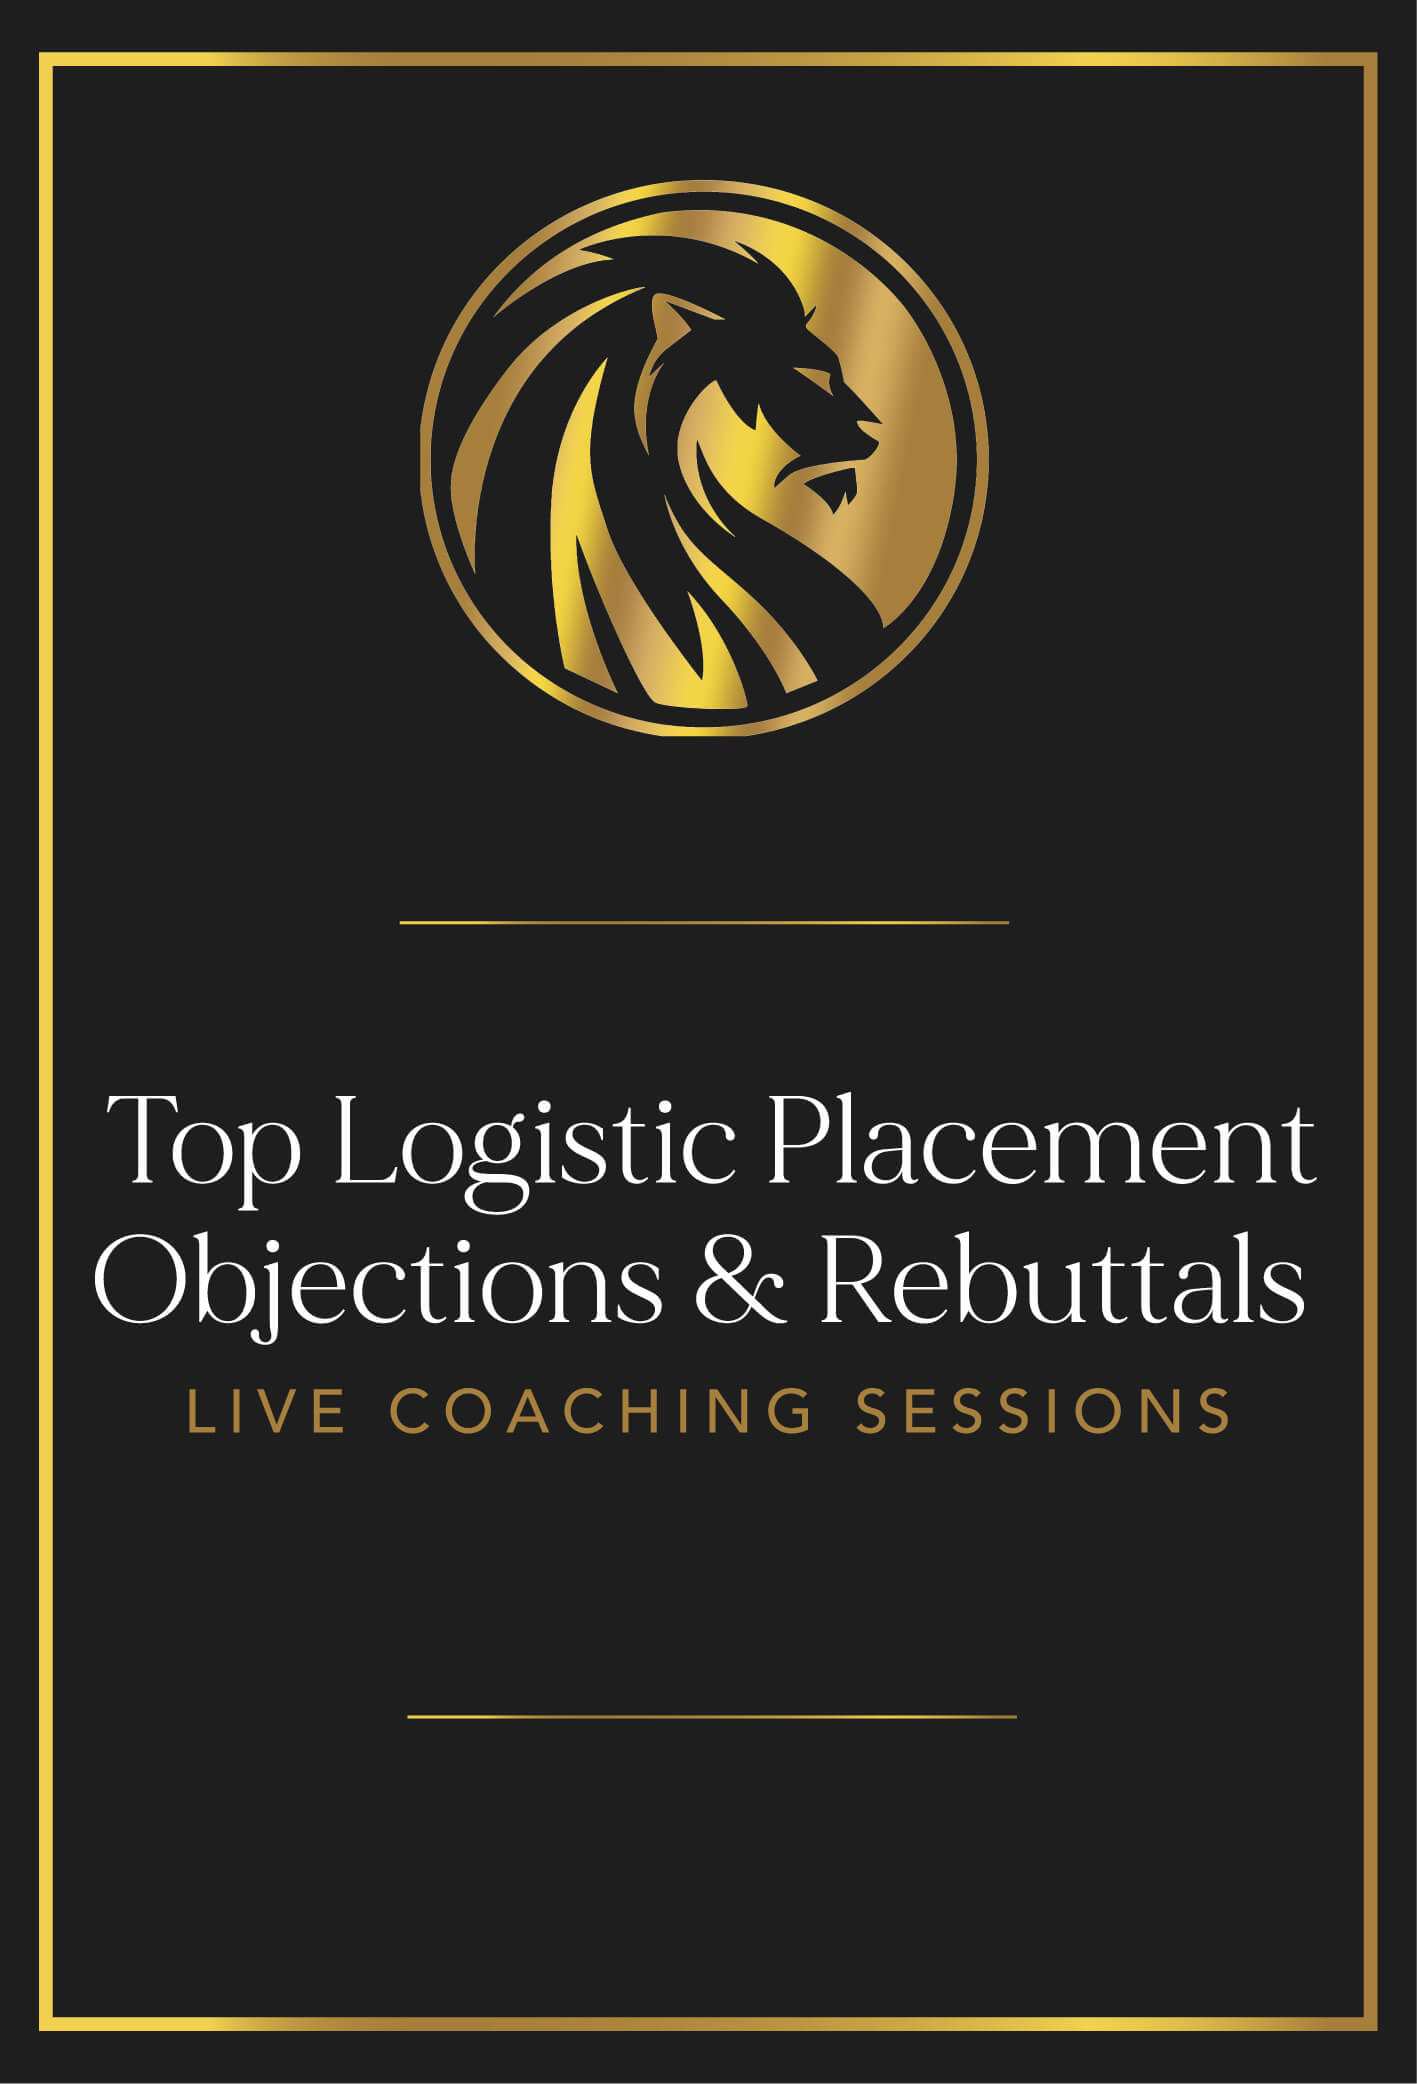 Top Logistic Placement Objections & Rebuttals